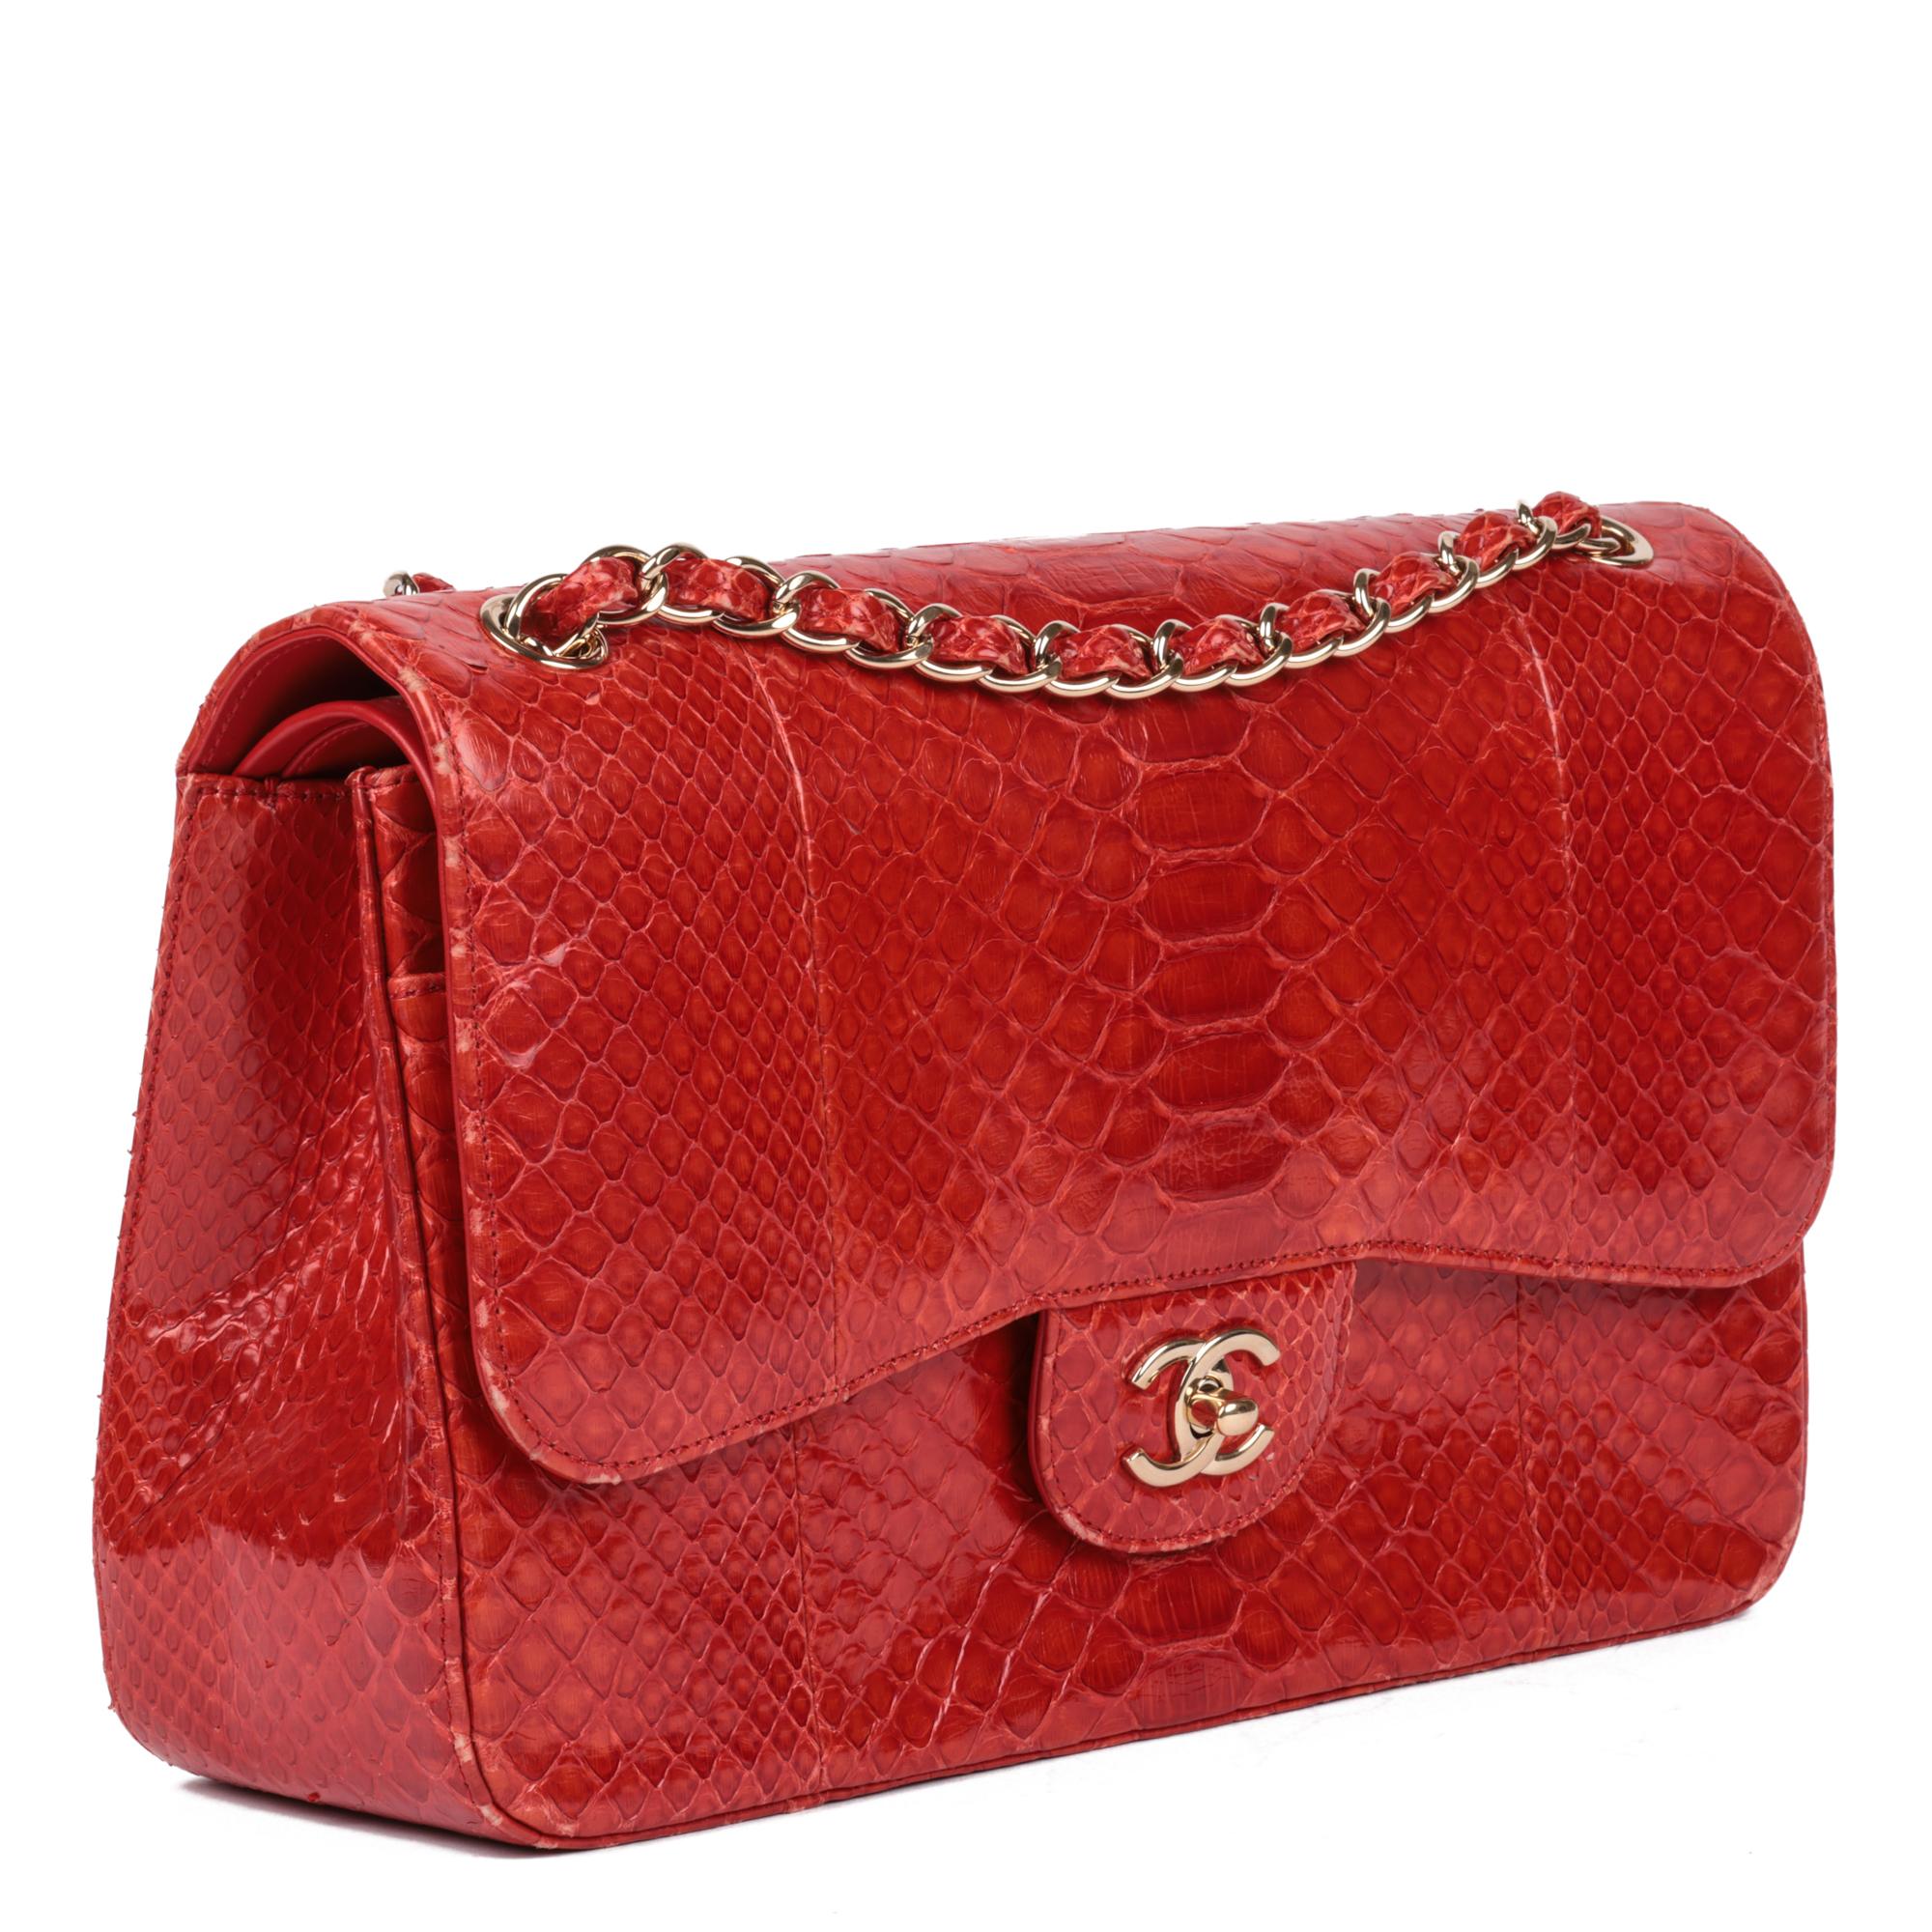 CHANEL
Red Python Leather Jumbo Classic Double Flap Bag 

Xupes Reference: CB837
Serial Number: 19198215
Age (Circa): 2014
Accompanied By: Chanel Dust Bag, Authenticity Card 
Authenticity Details: Authenticity Card, Serial Sticker (Made in